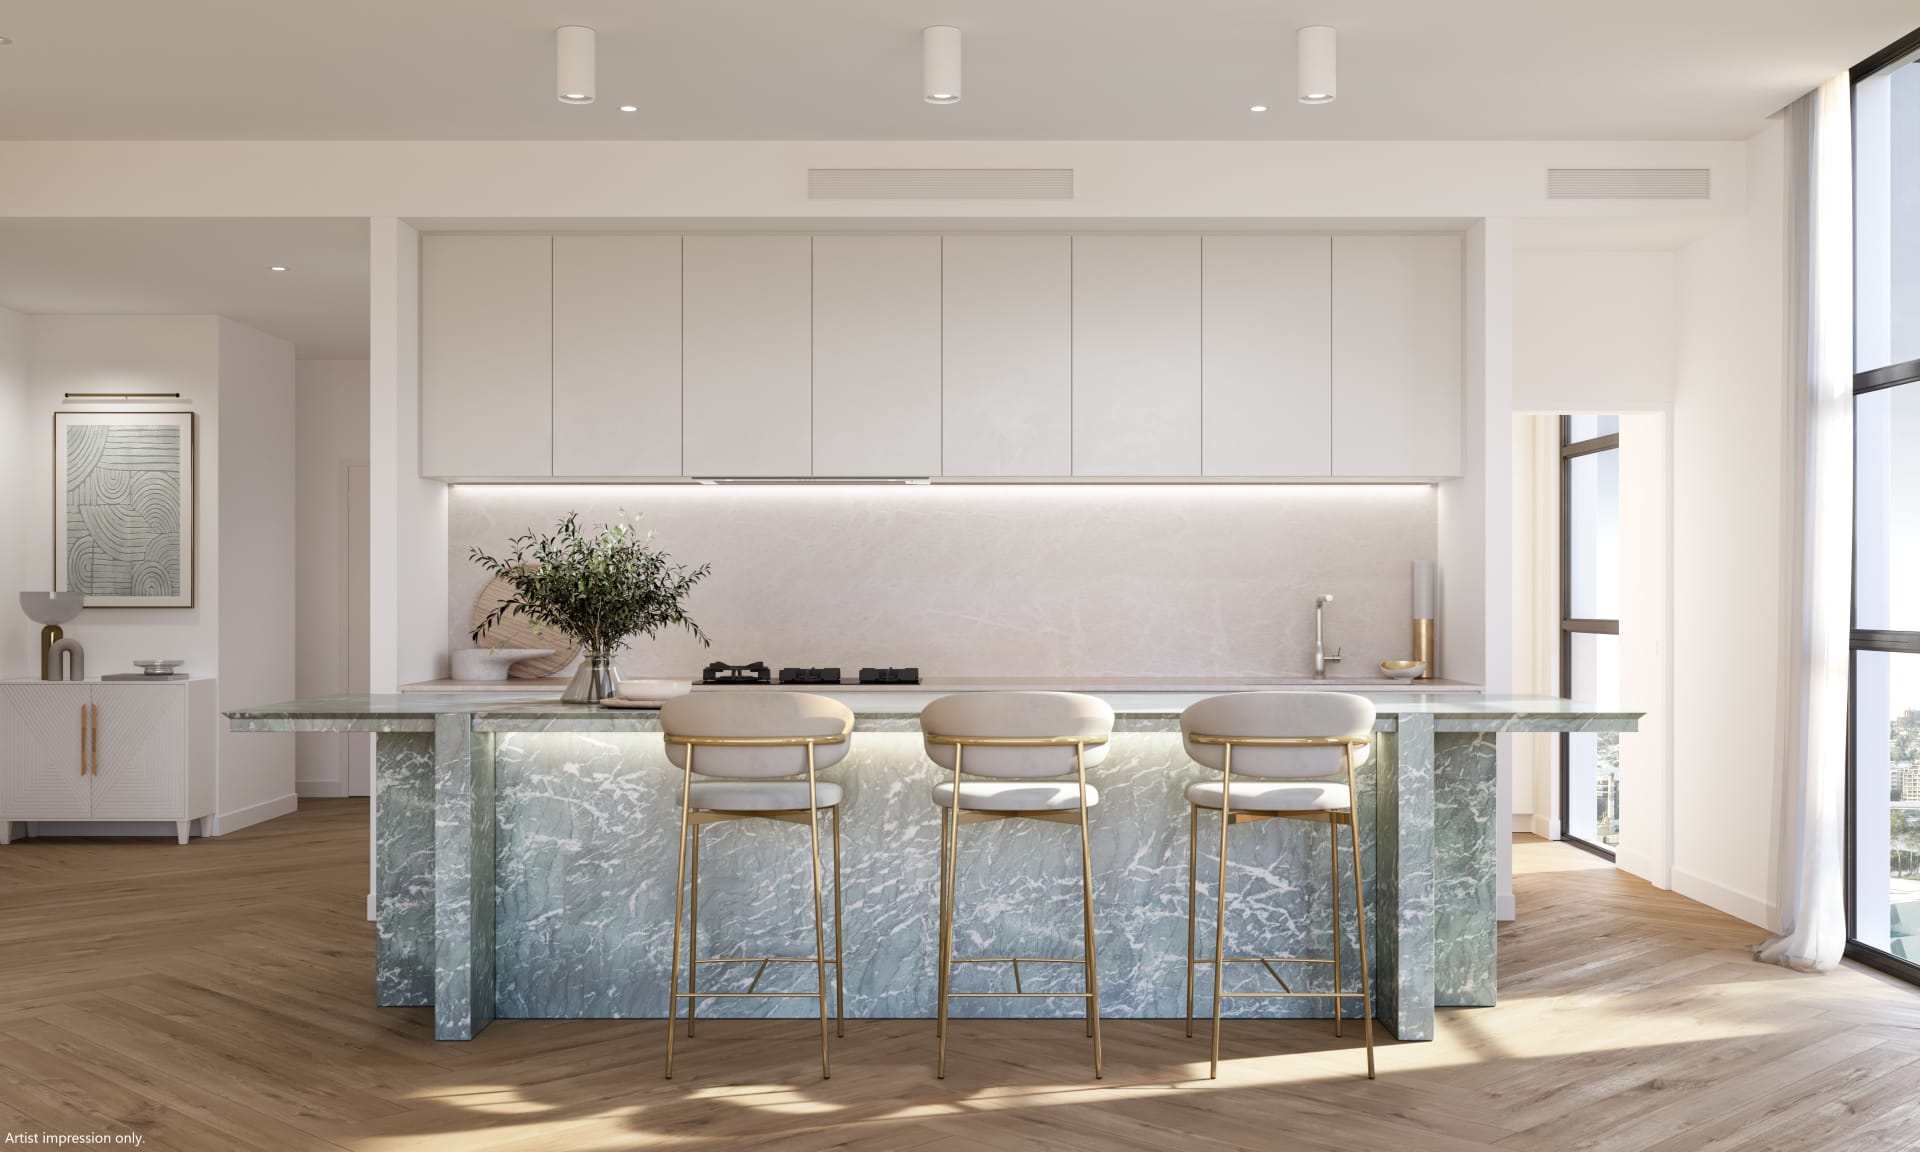 Sekisui release final apartments in West Village's Allere Collection